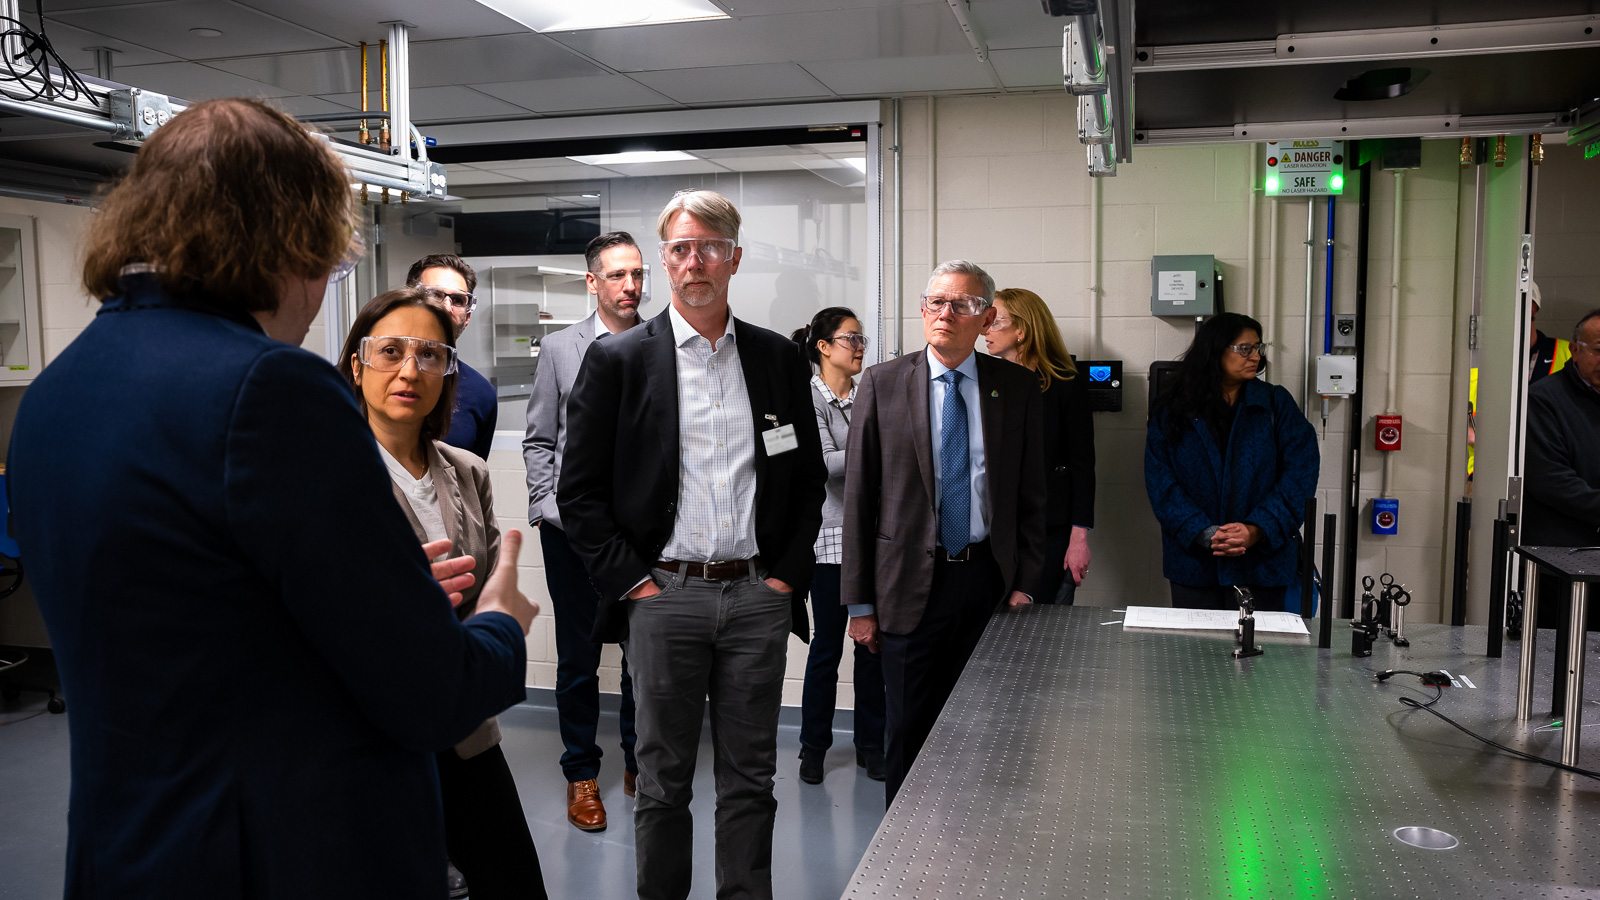 Argonne scientist Joe Heremans gives a tour of the Argonne Quantum Foundry to guests at the ribbon cutting.